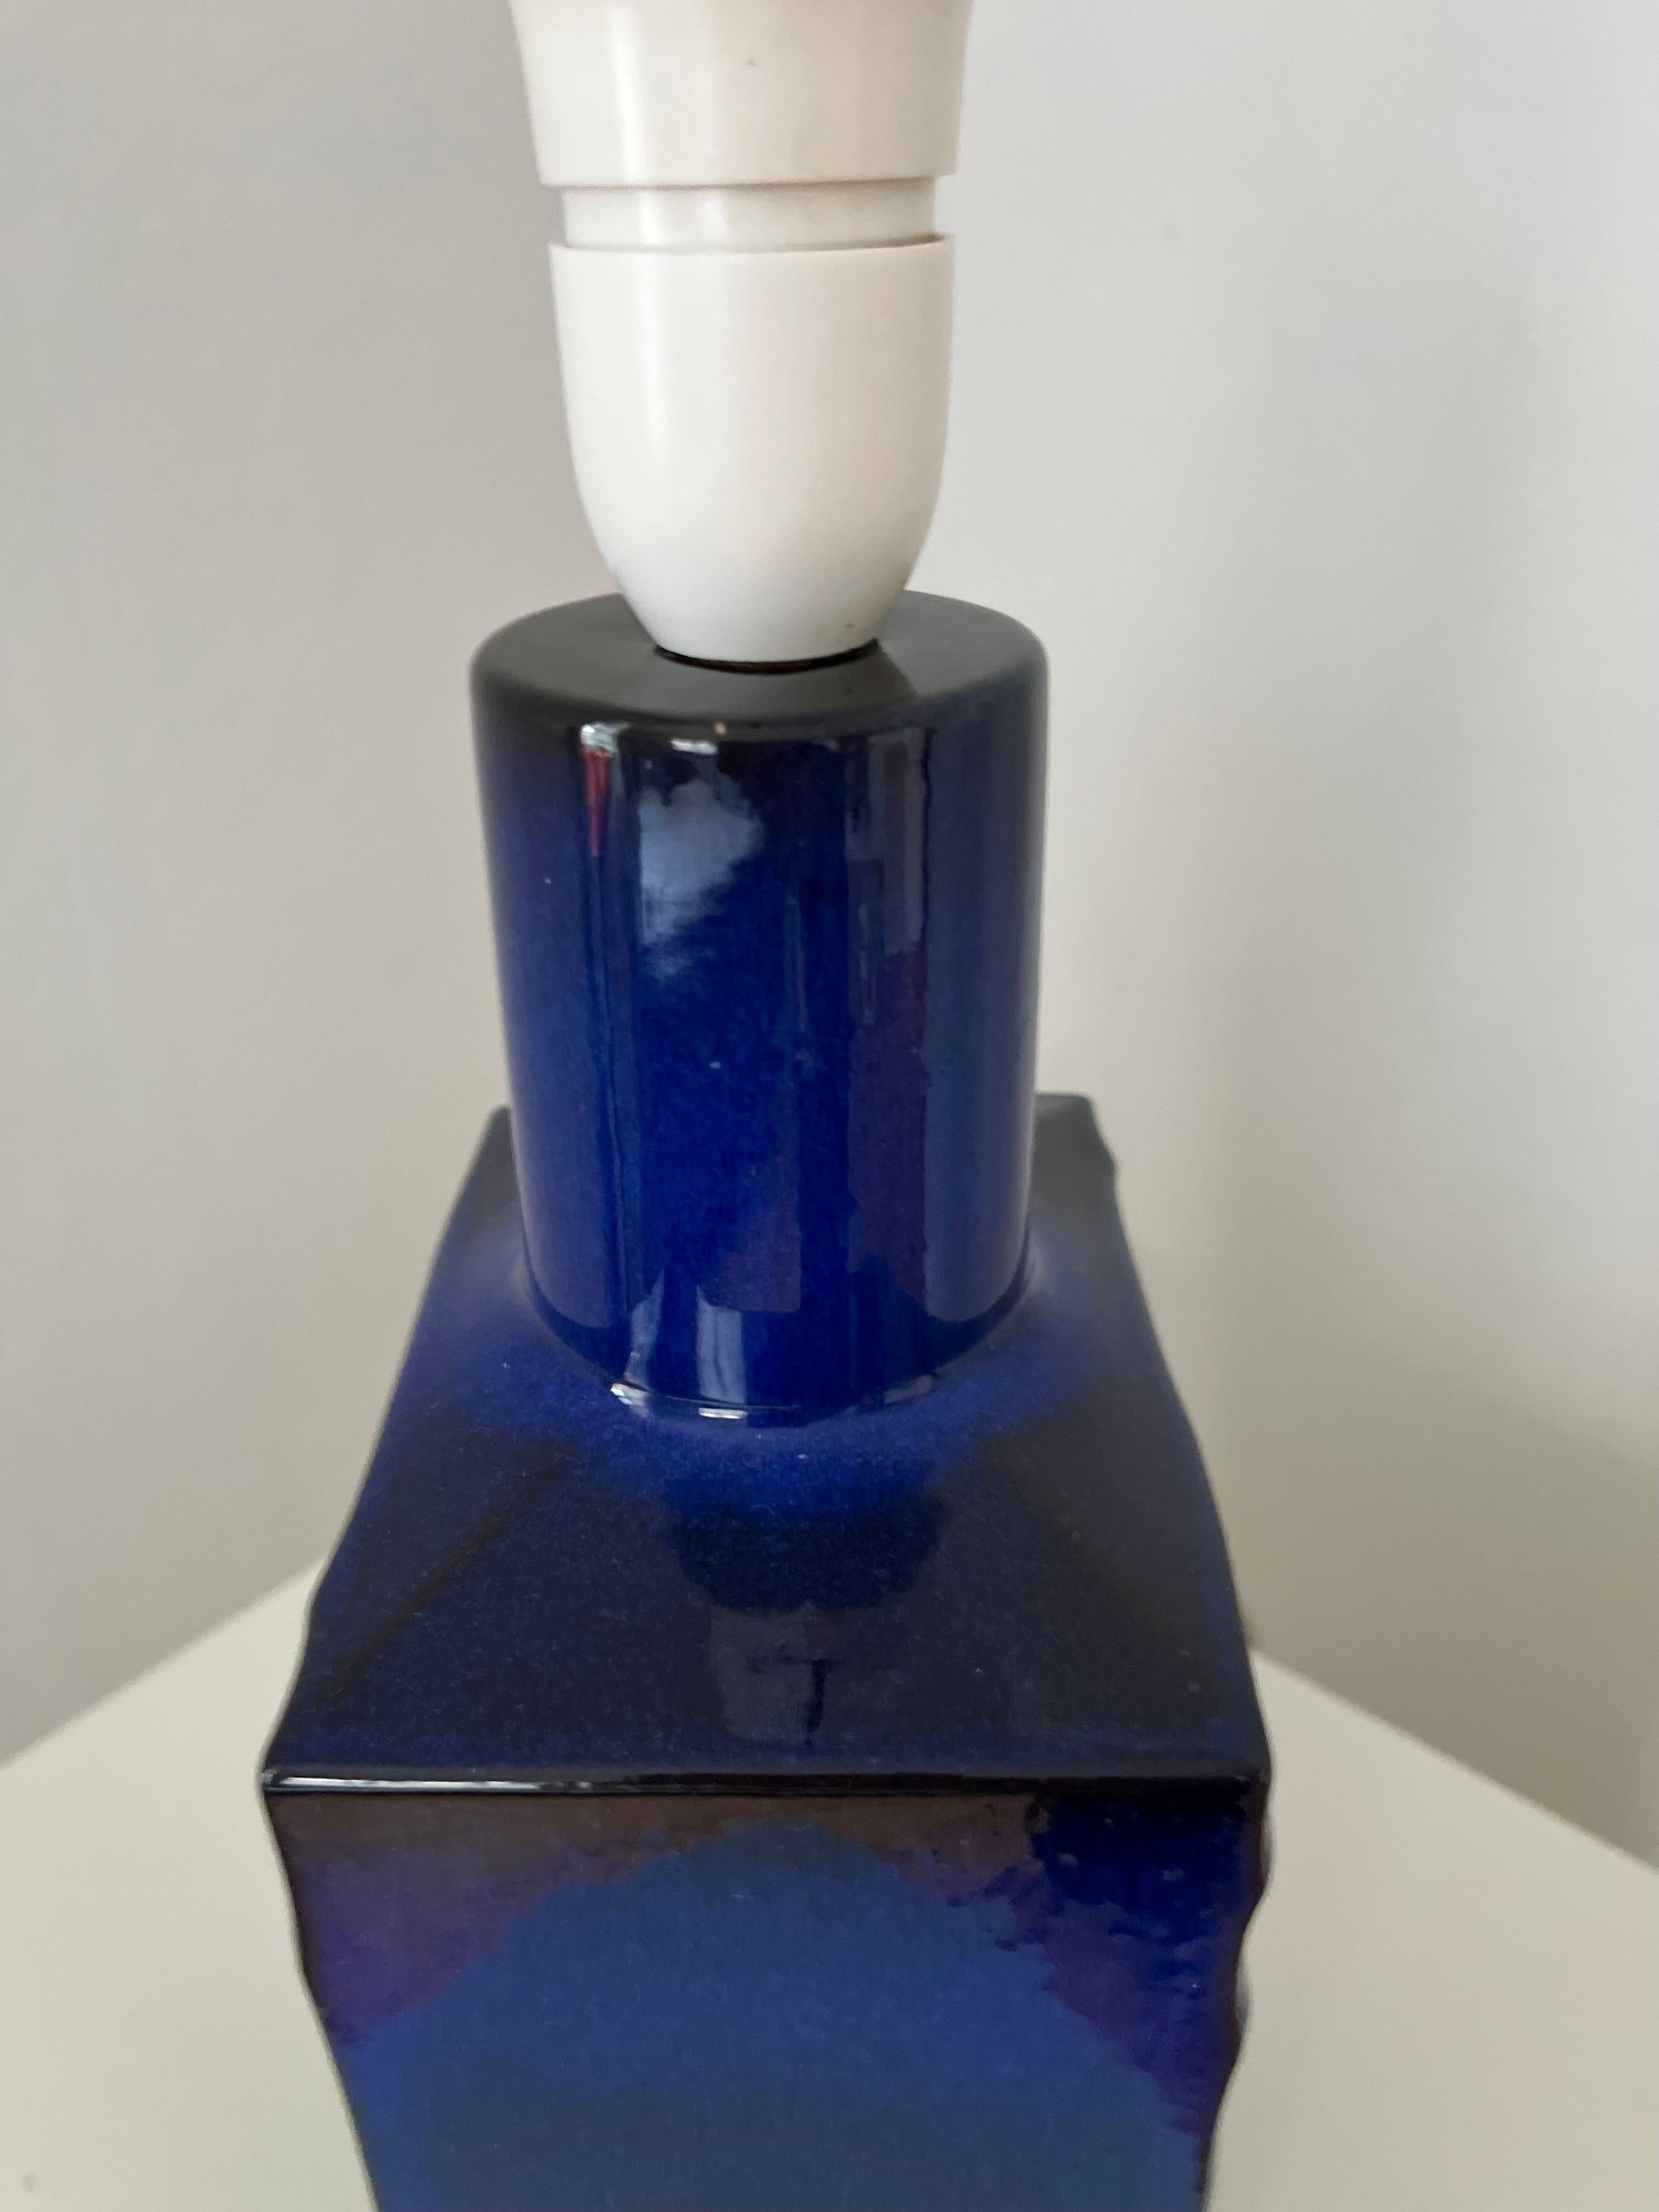 Zyklon ceramic Mid-century modern table lamp by Cari Zalloni for Steuler 1960s For Sale 6